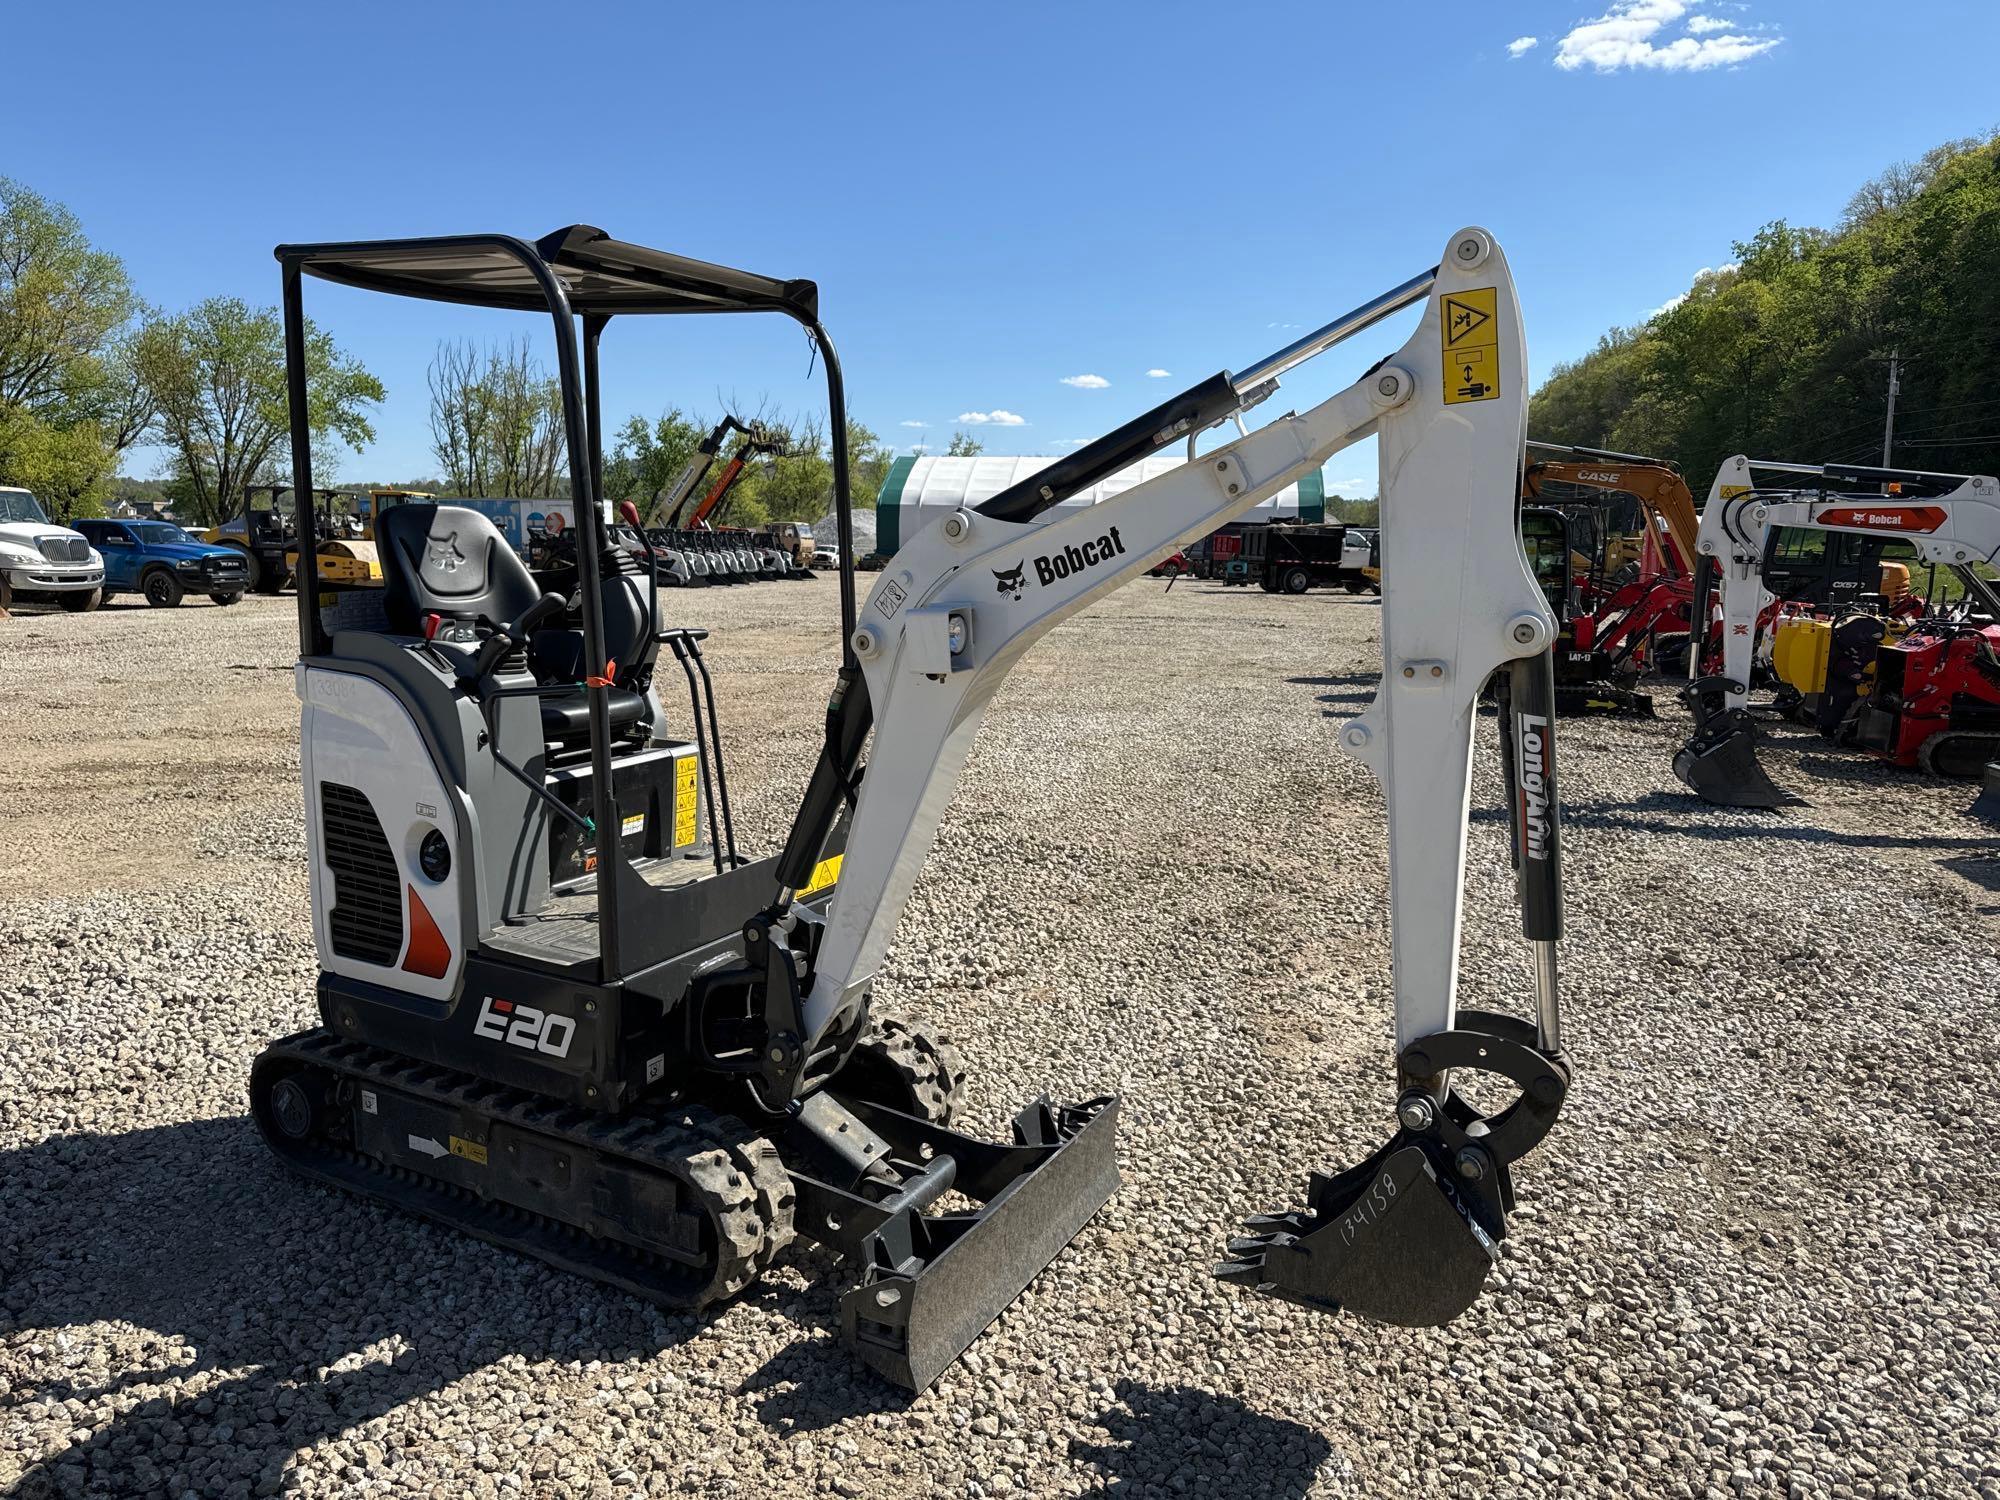 NEW UNUSED BOBCAT E20 HYDRAULIC EXCAVATOR SN-G11588, powered by diesel engine, equipped with OROPS,